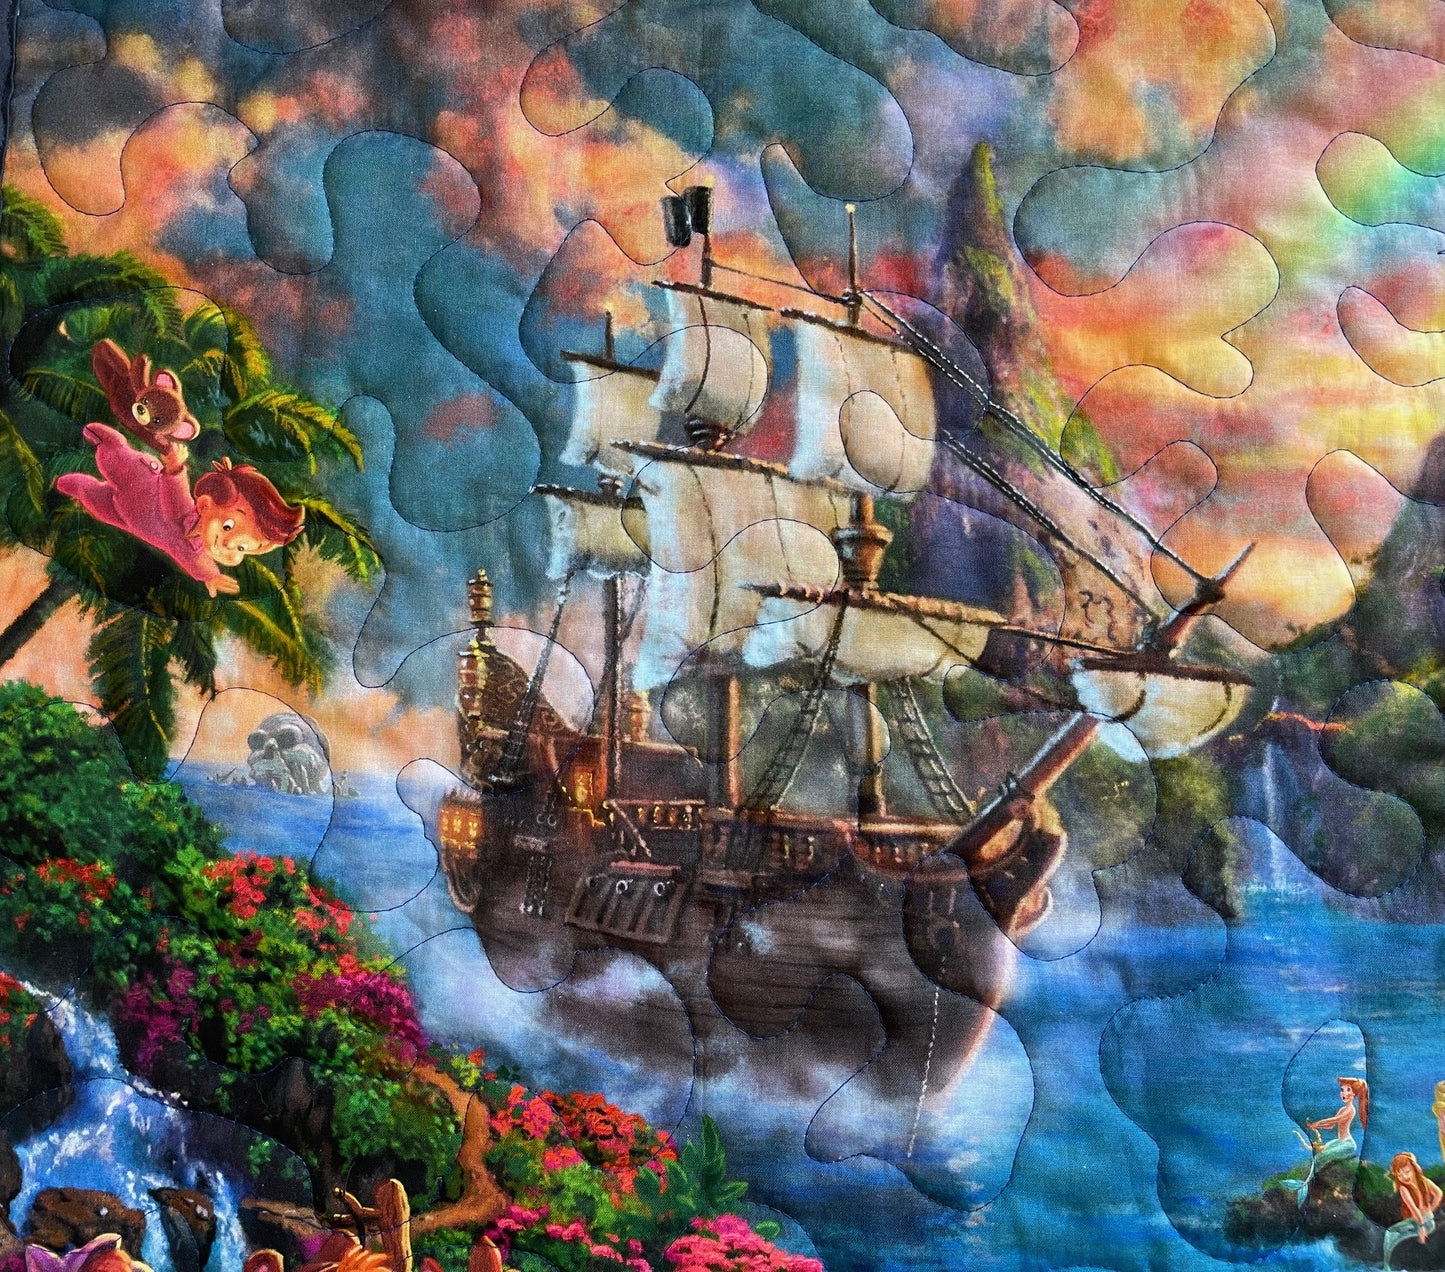 PETER PAN NEVER LAND Inspired Quilted Blanket 36"x44" DIGITALLY PRINTED FABRIC